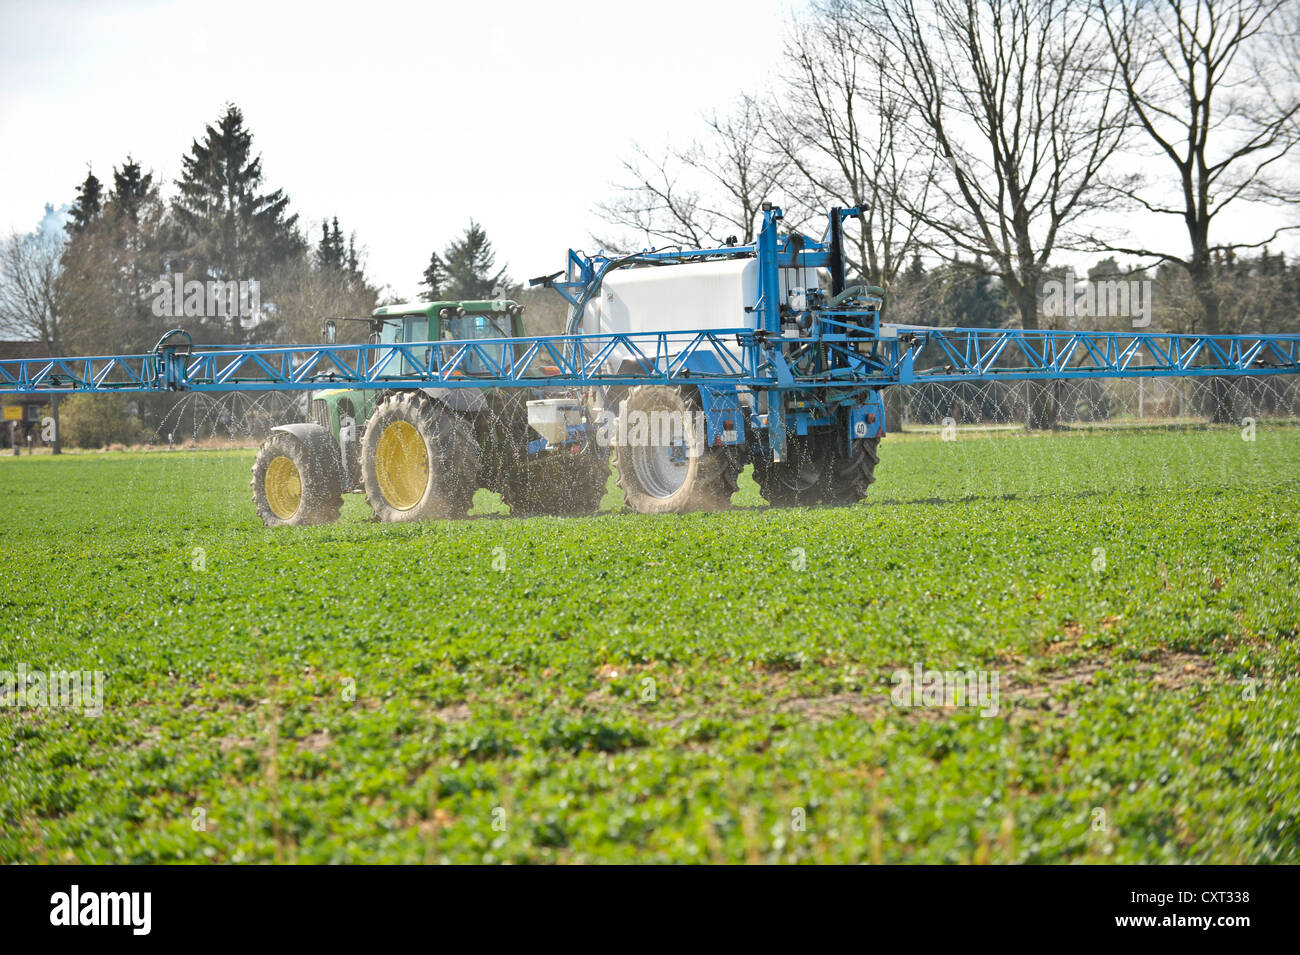 Farmer in a tractor spraying weed killer on a field Stock Photo - Alamy